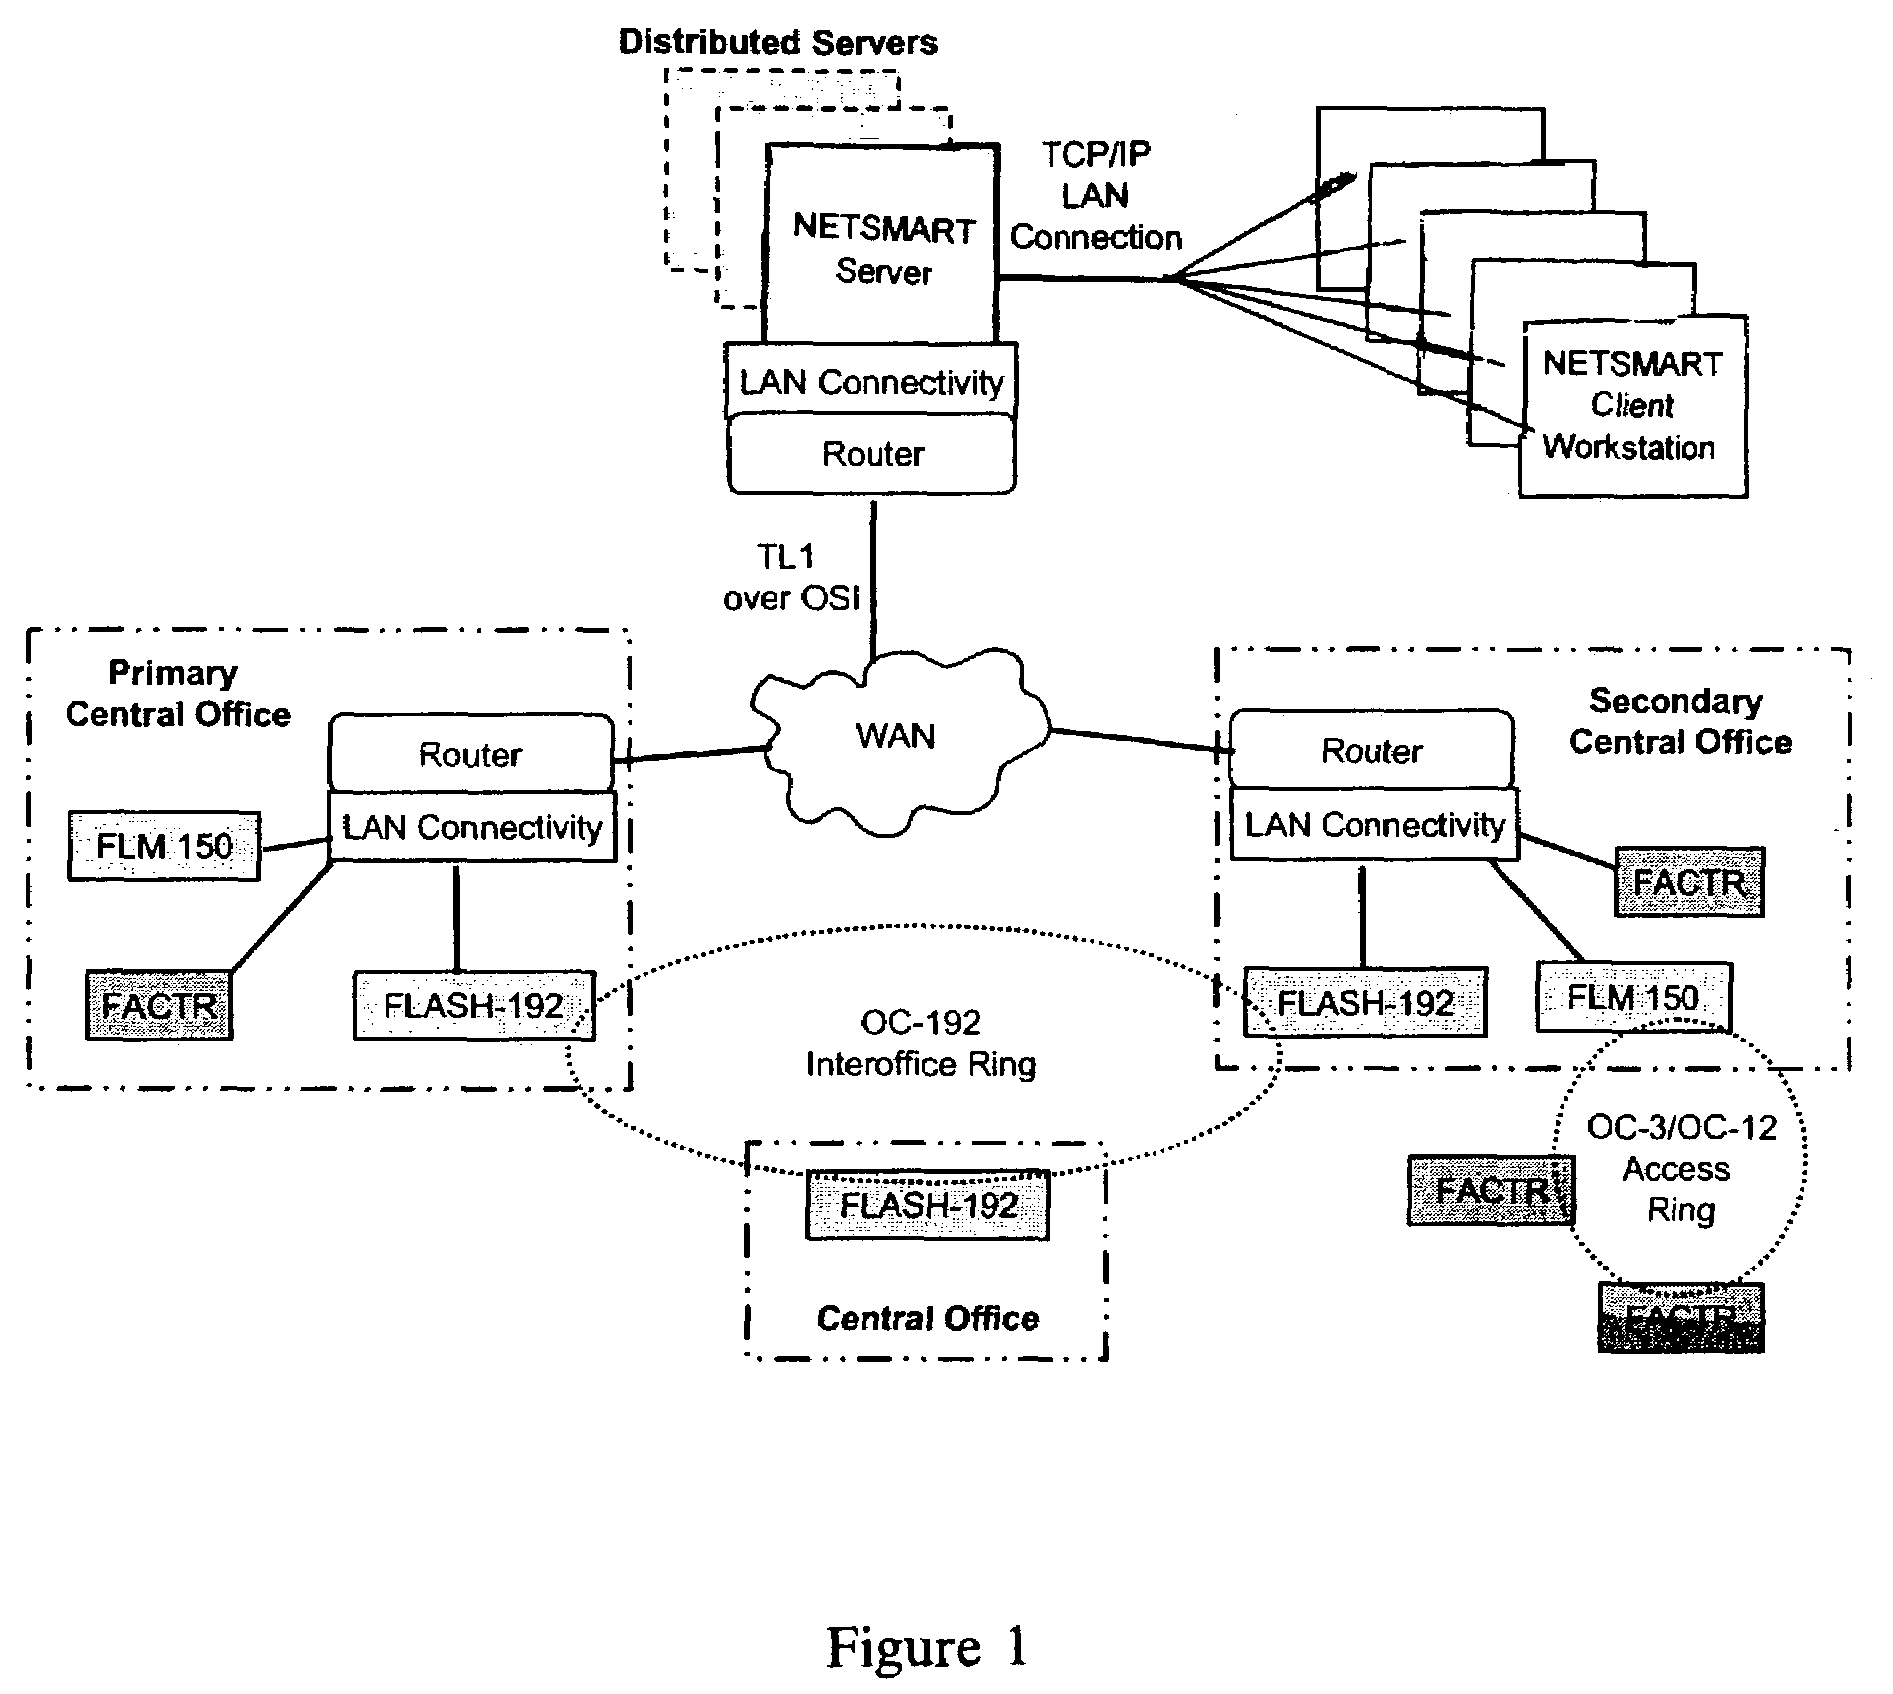 Element management system with data-driven interfacing driven by instantiation of meta-model